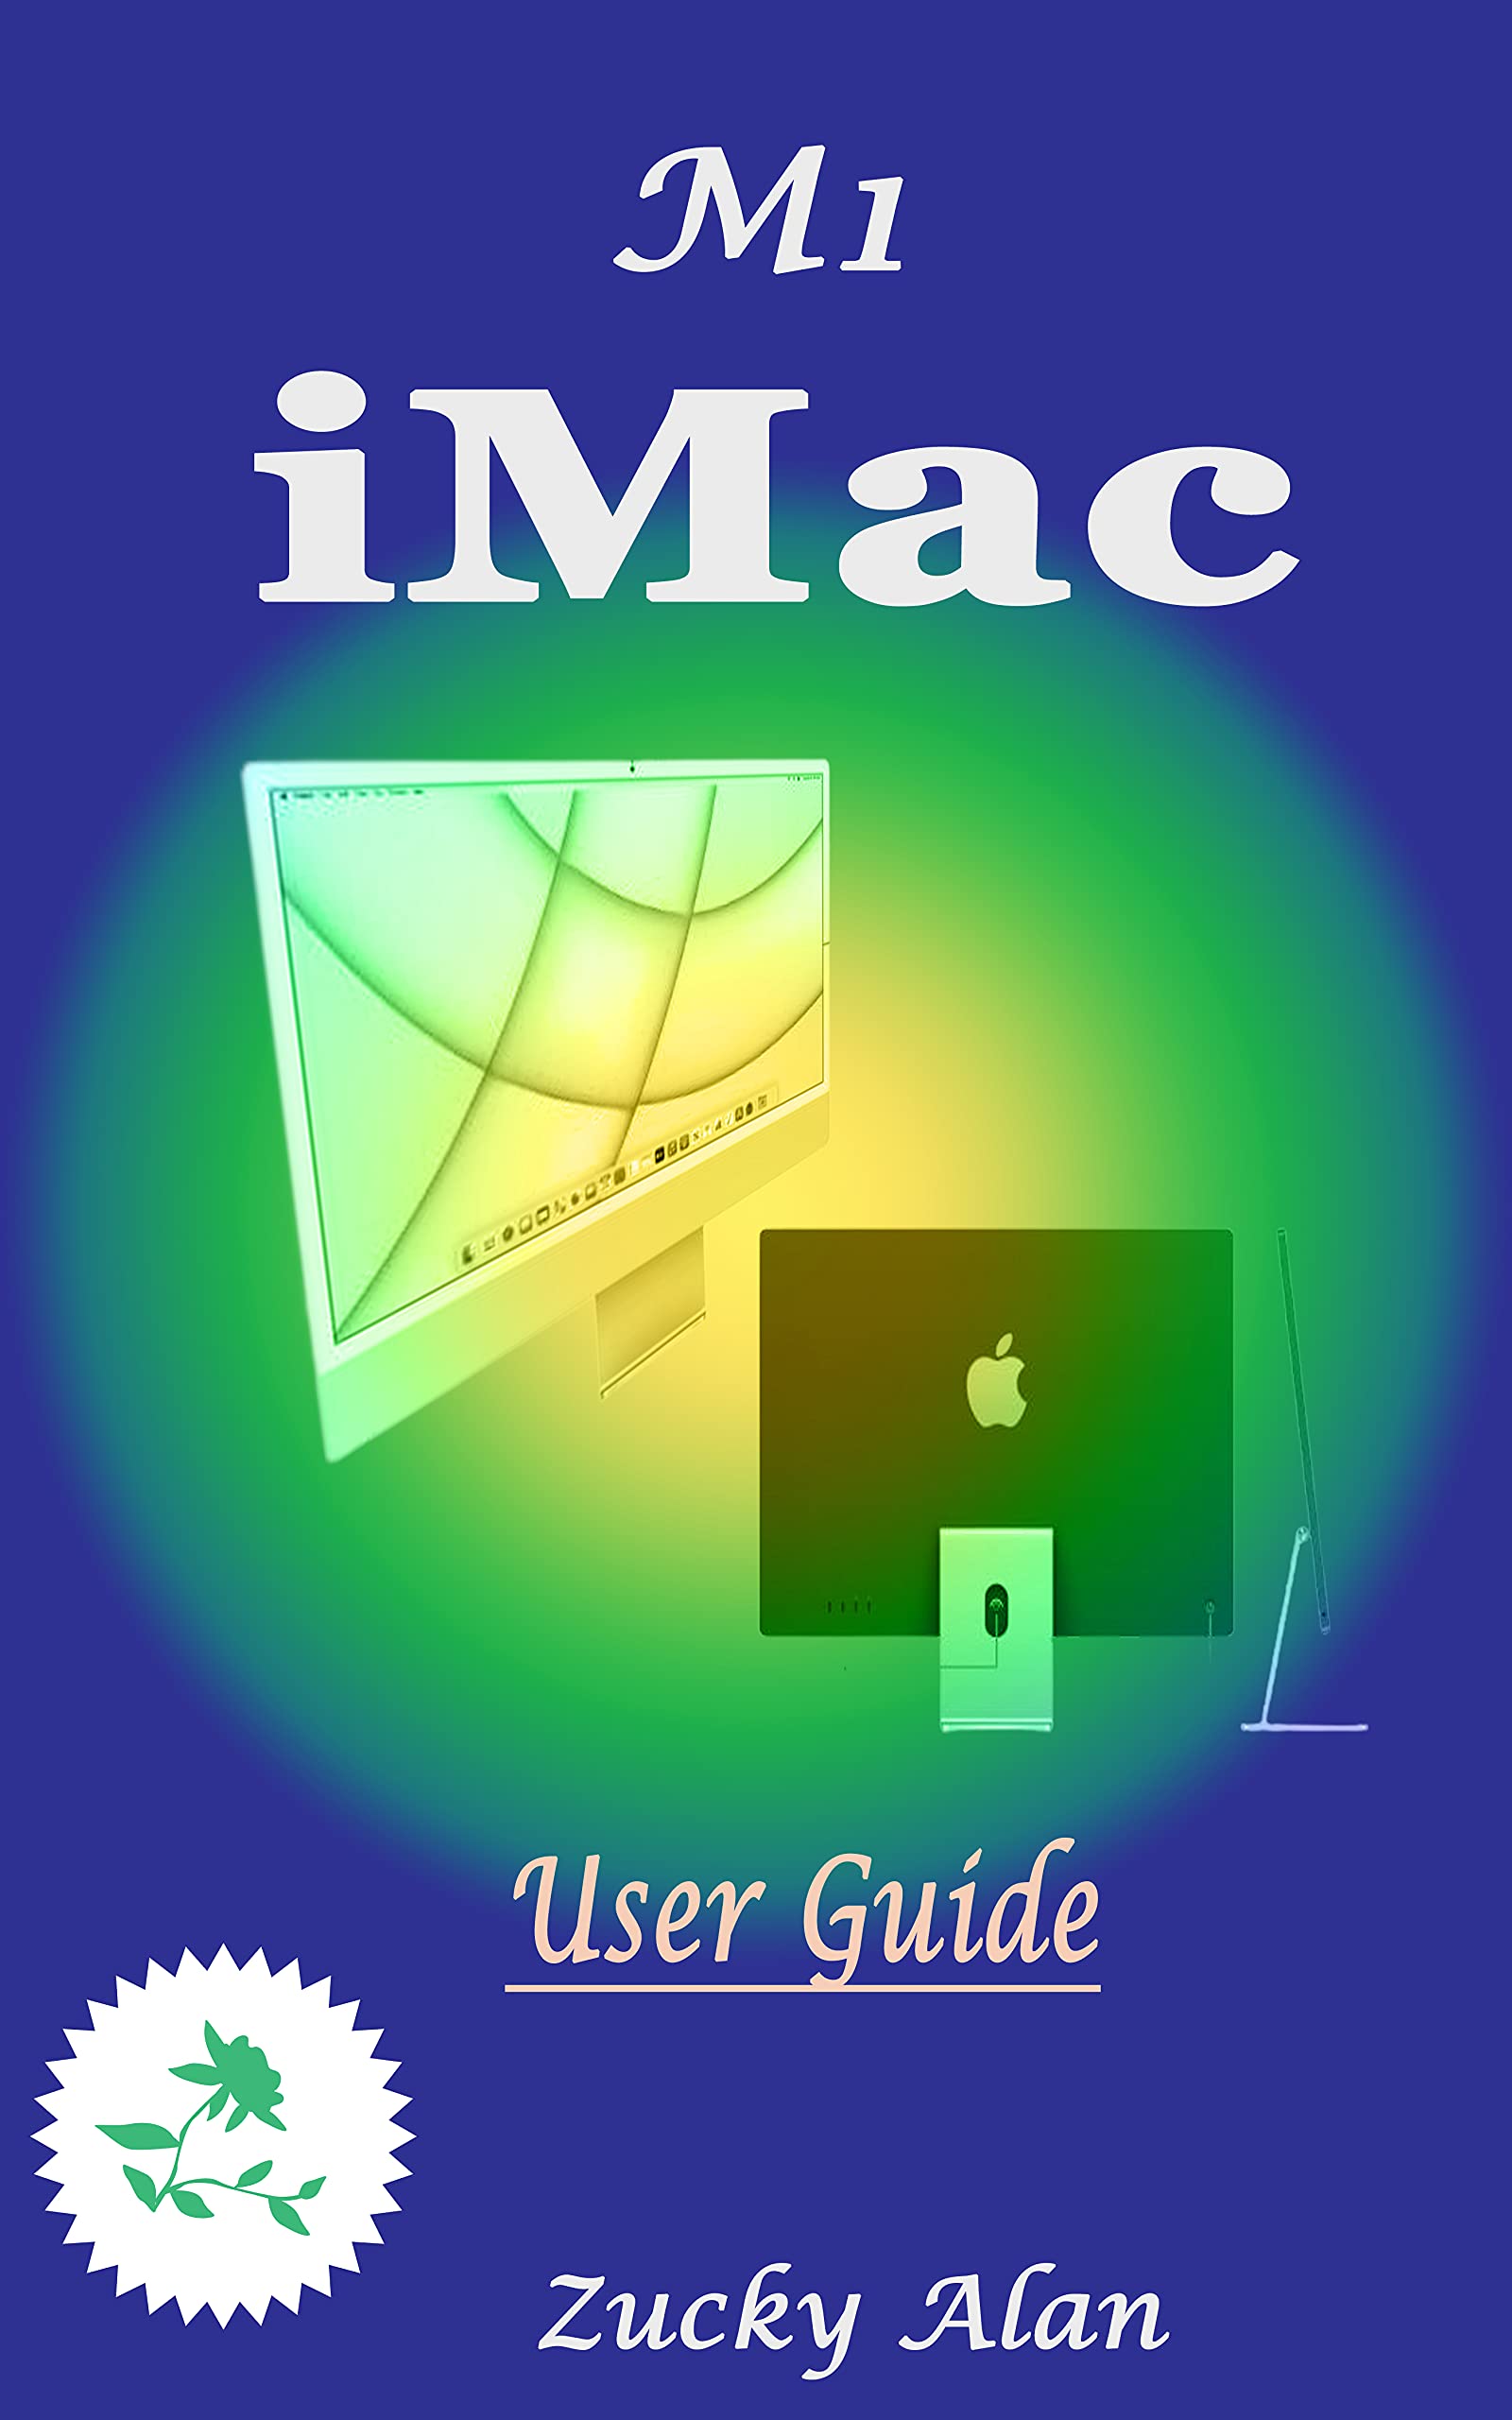 M1 iMAC USER GUIDE: The Ultimate Step By Step Technical Manual For Beginners And Seniors To Master Apple’s New 24-Inch iMac Model With Tips, And Shortcuts For Macos Big Sur 11 2021